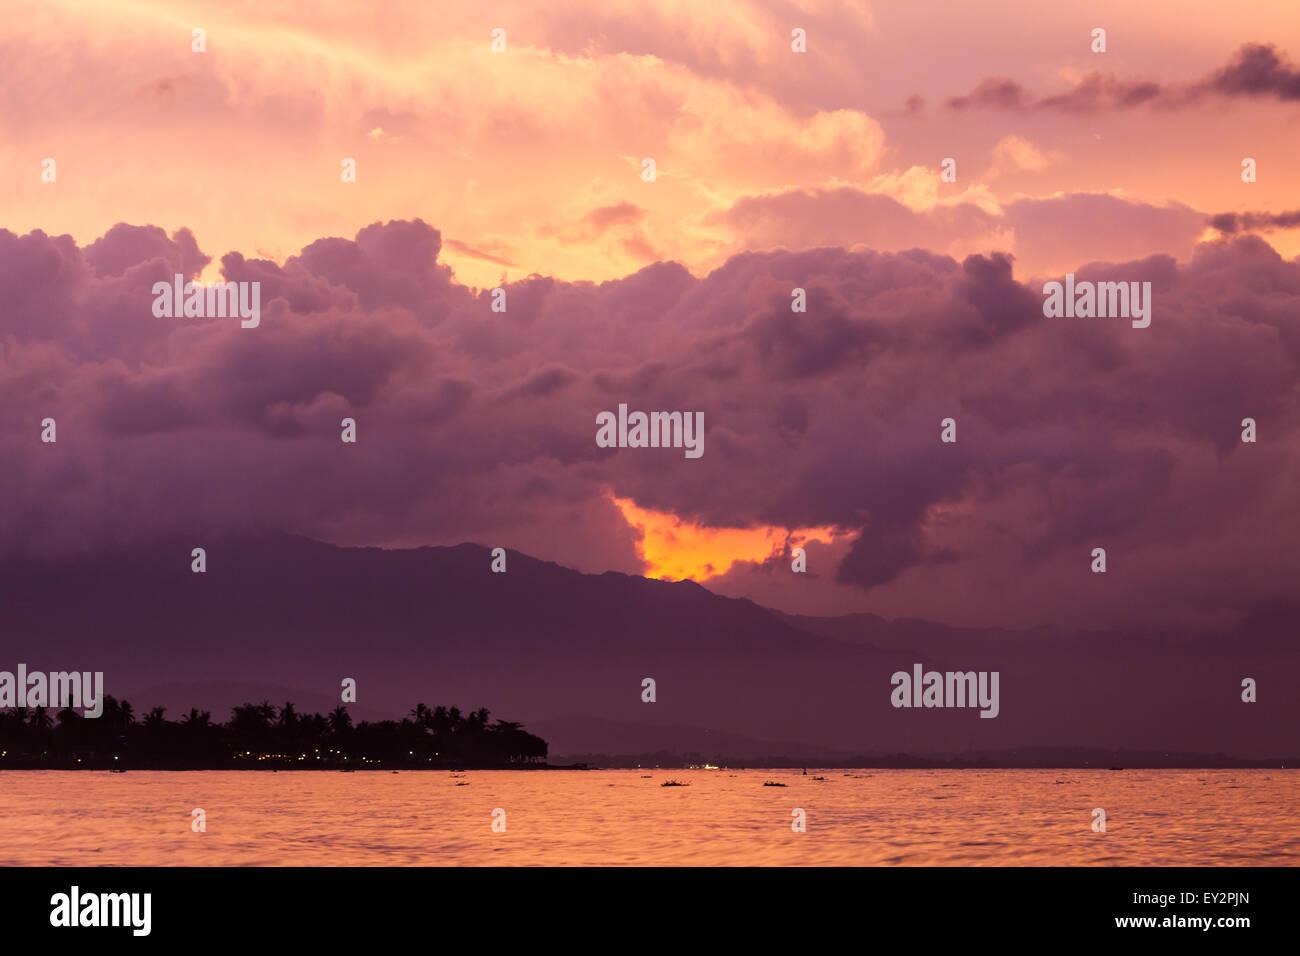 Vibrant tropical sunset at Bali indonesia Stock Photo